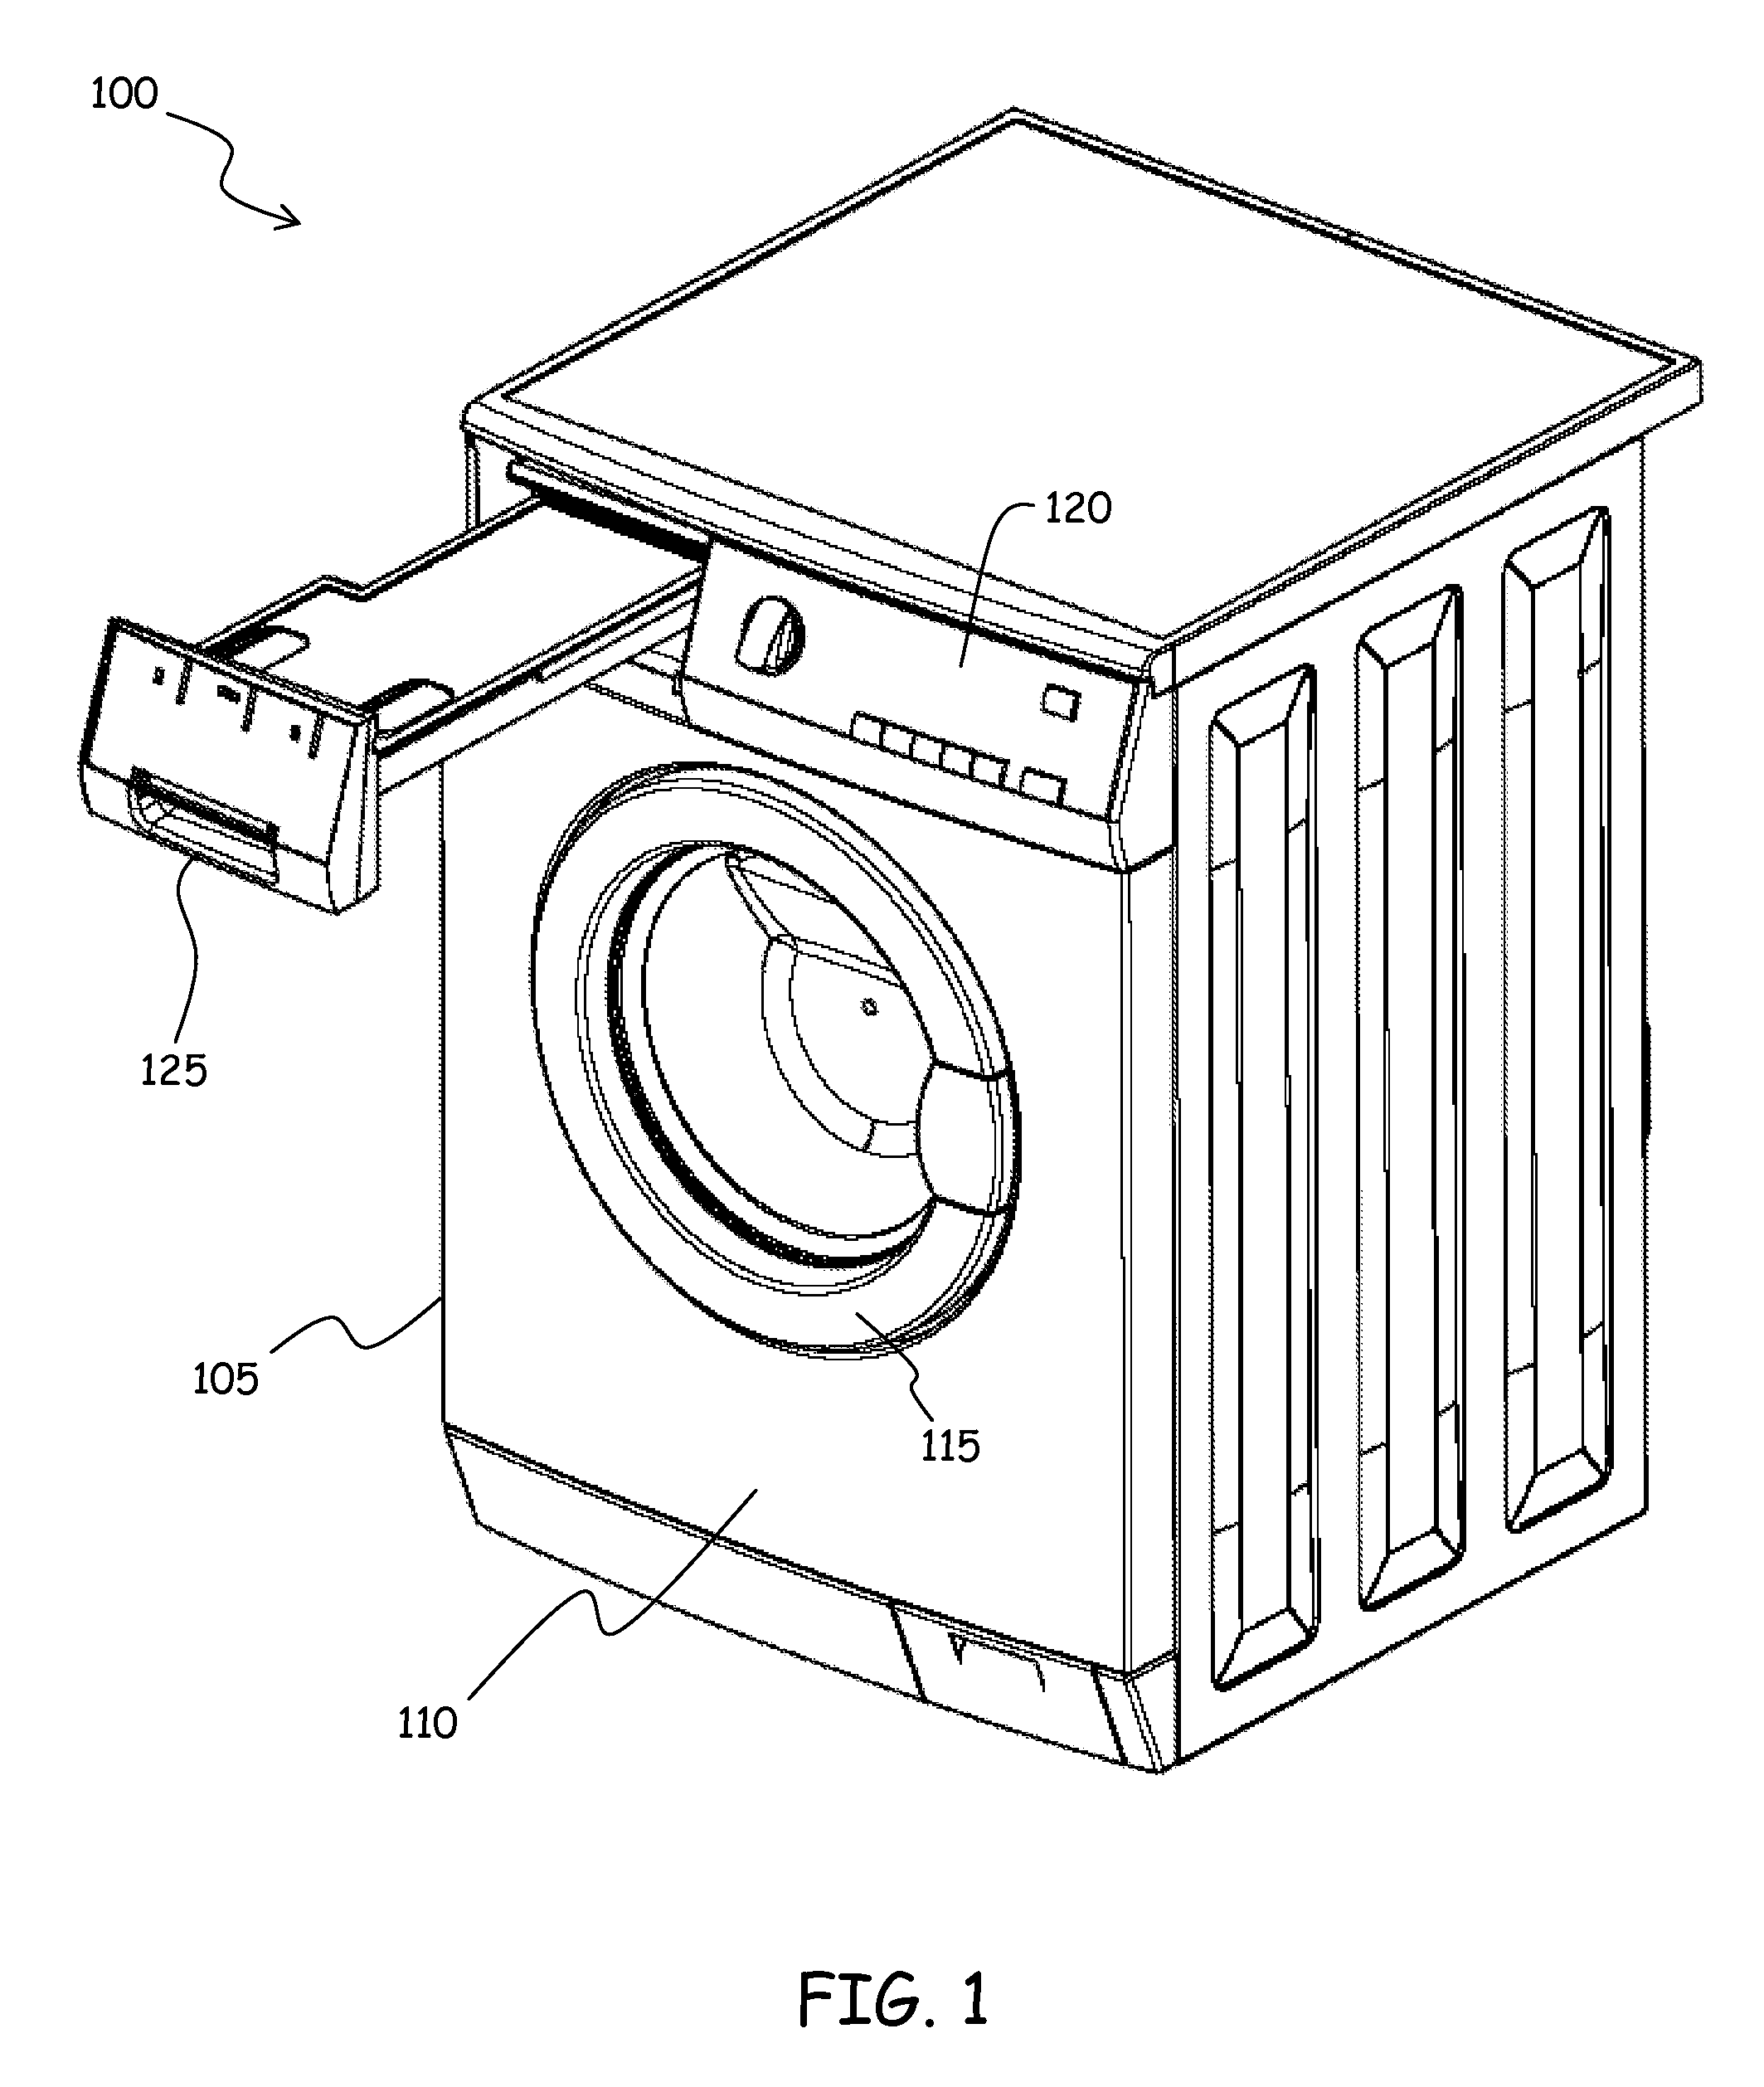 Laundry washing appliance with dosing dispenser